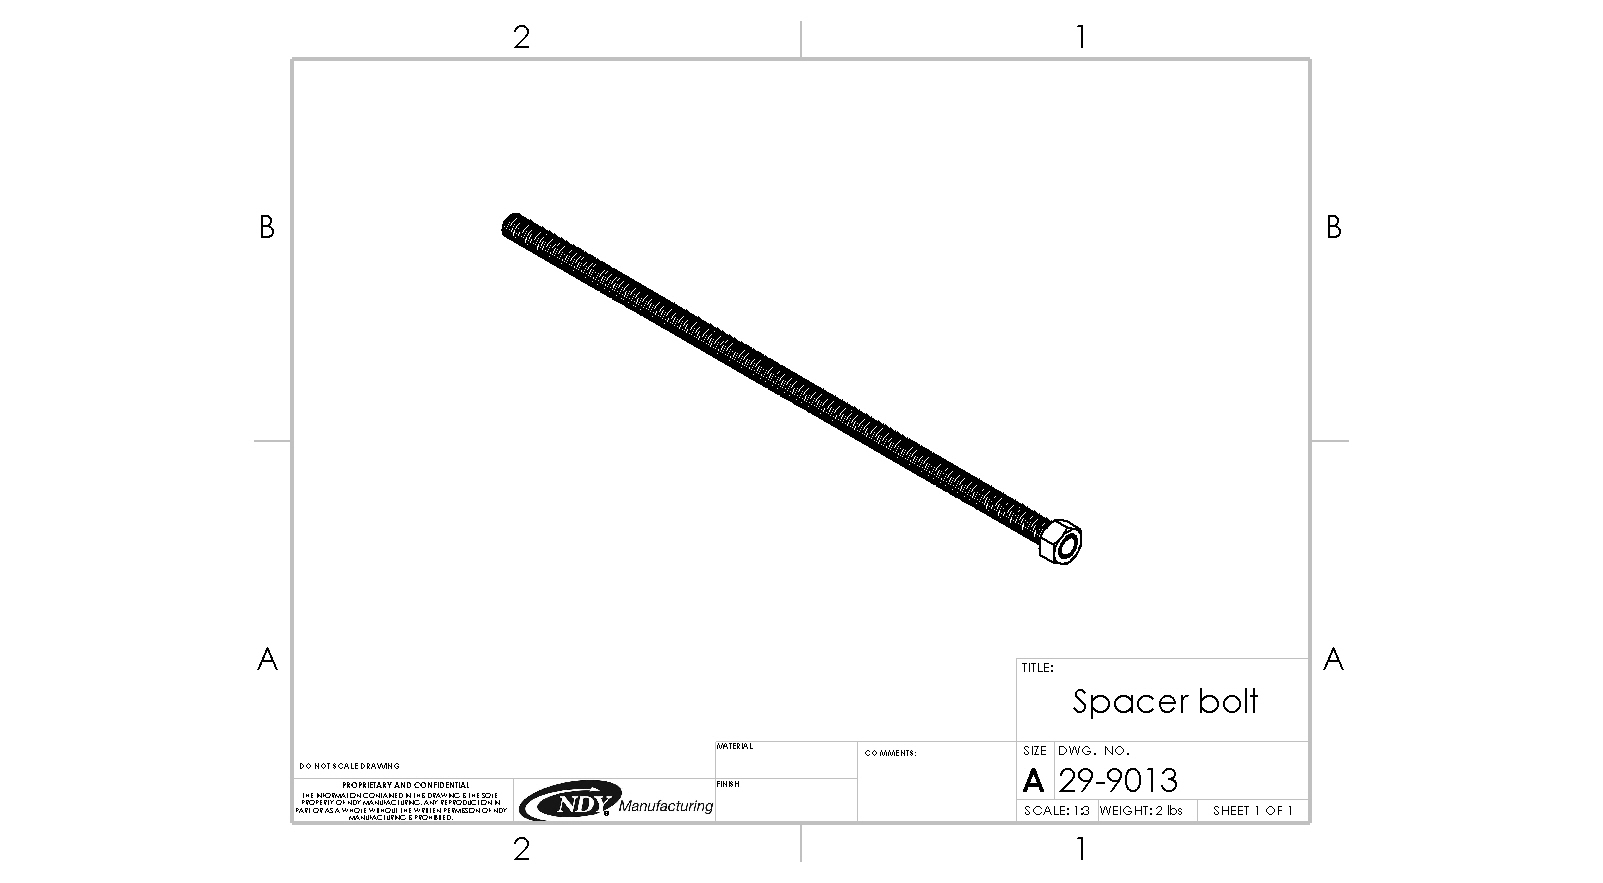 A drawing of a Rock Box Spacer Bolt for John Deere 8000 Series w/o Weights with a pencil on it.